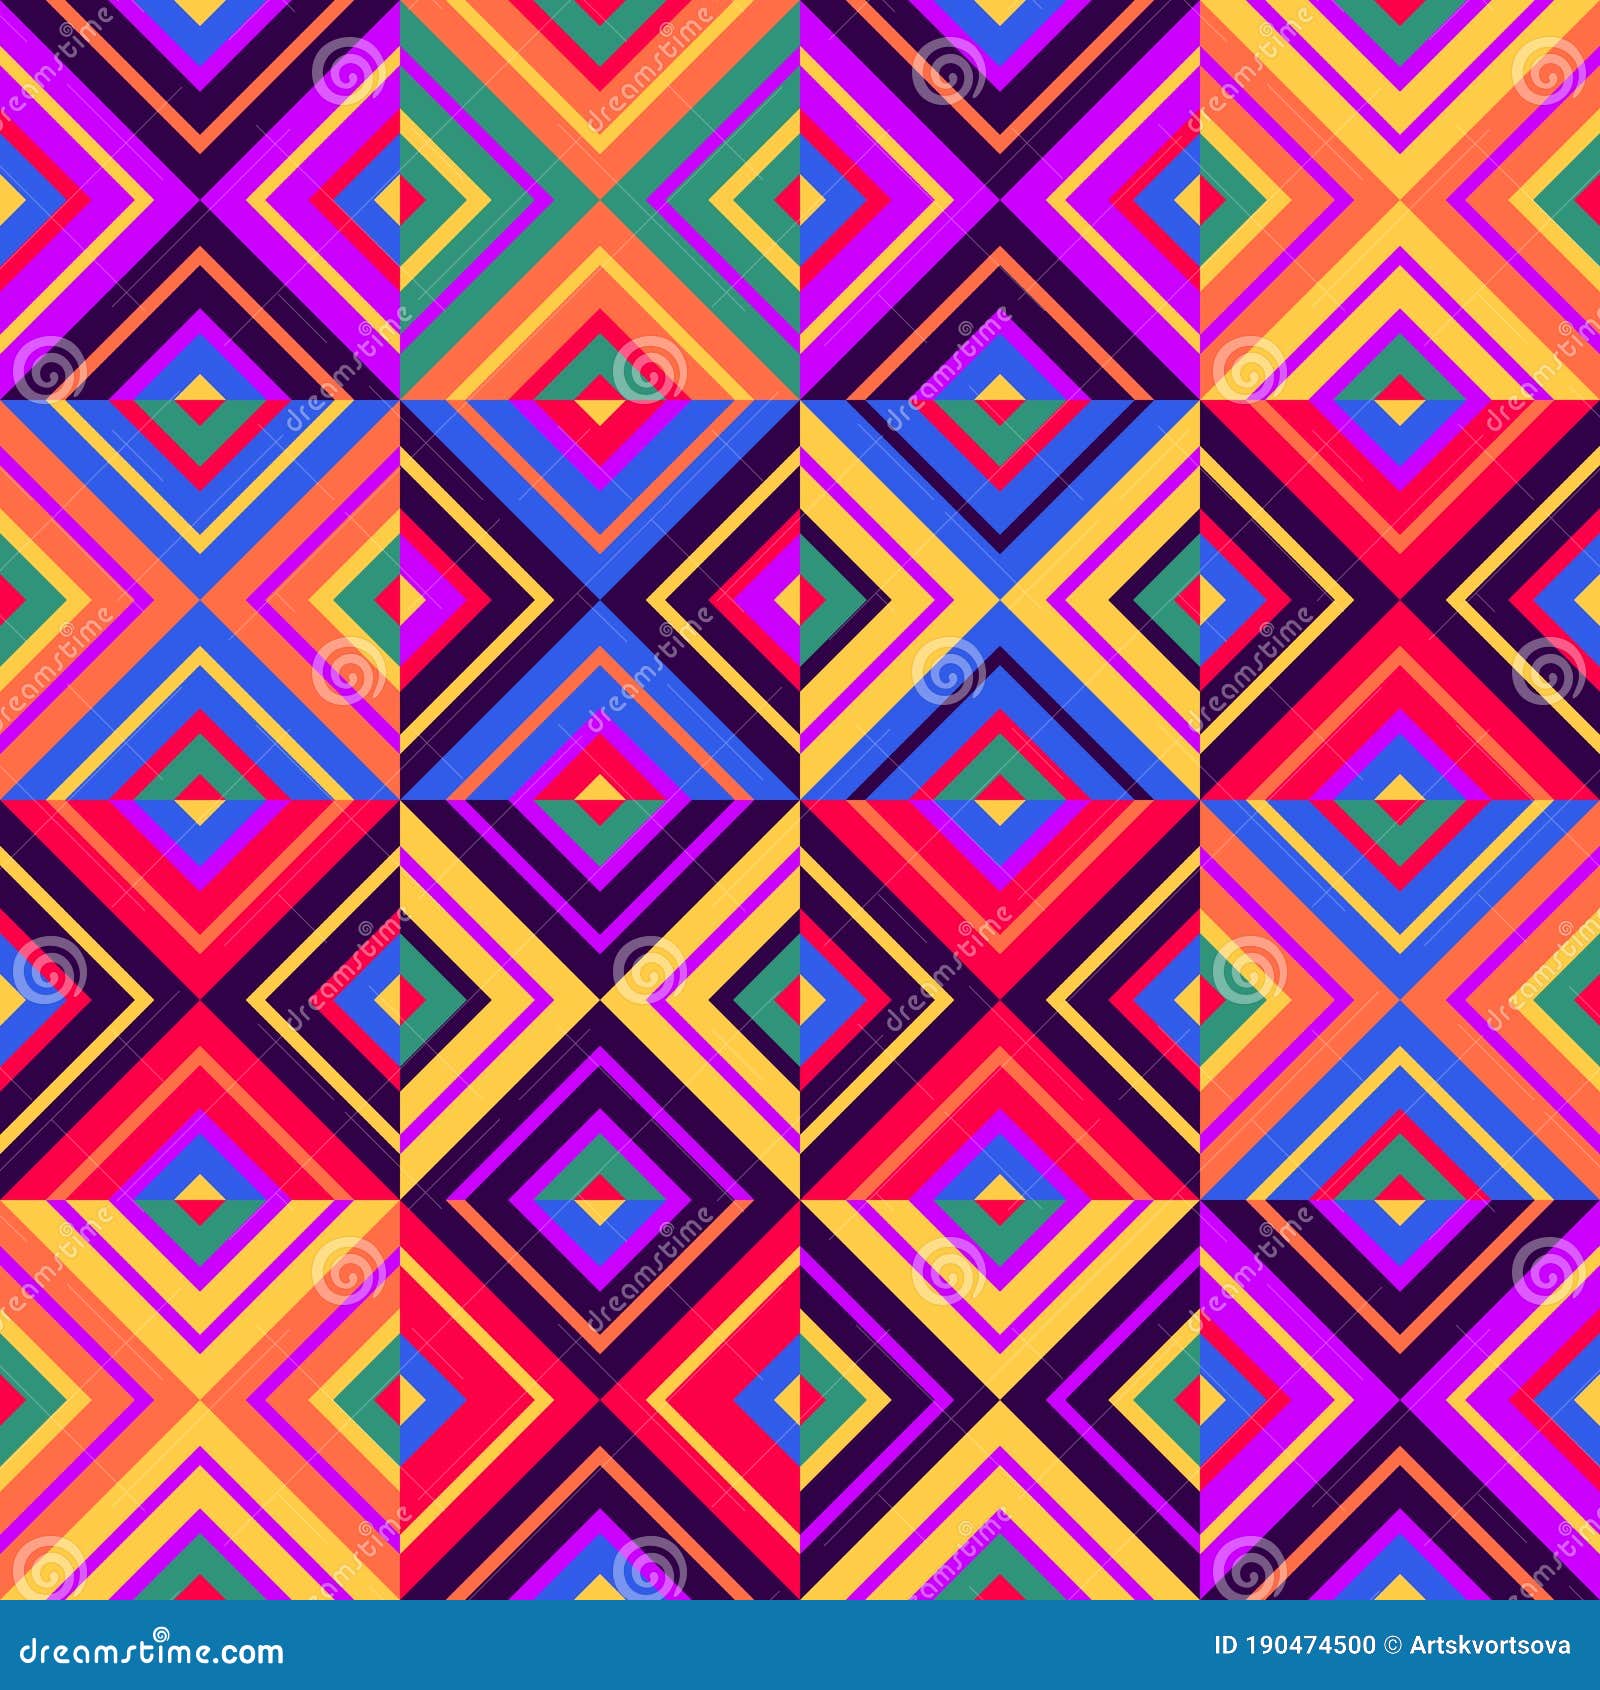 Seamless African Pattern. Ethnic Seamless Design for Background or ...